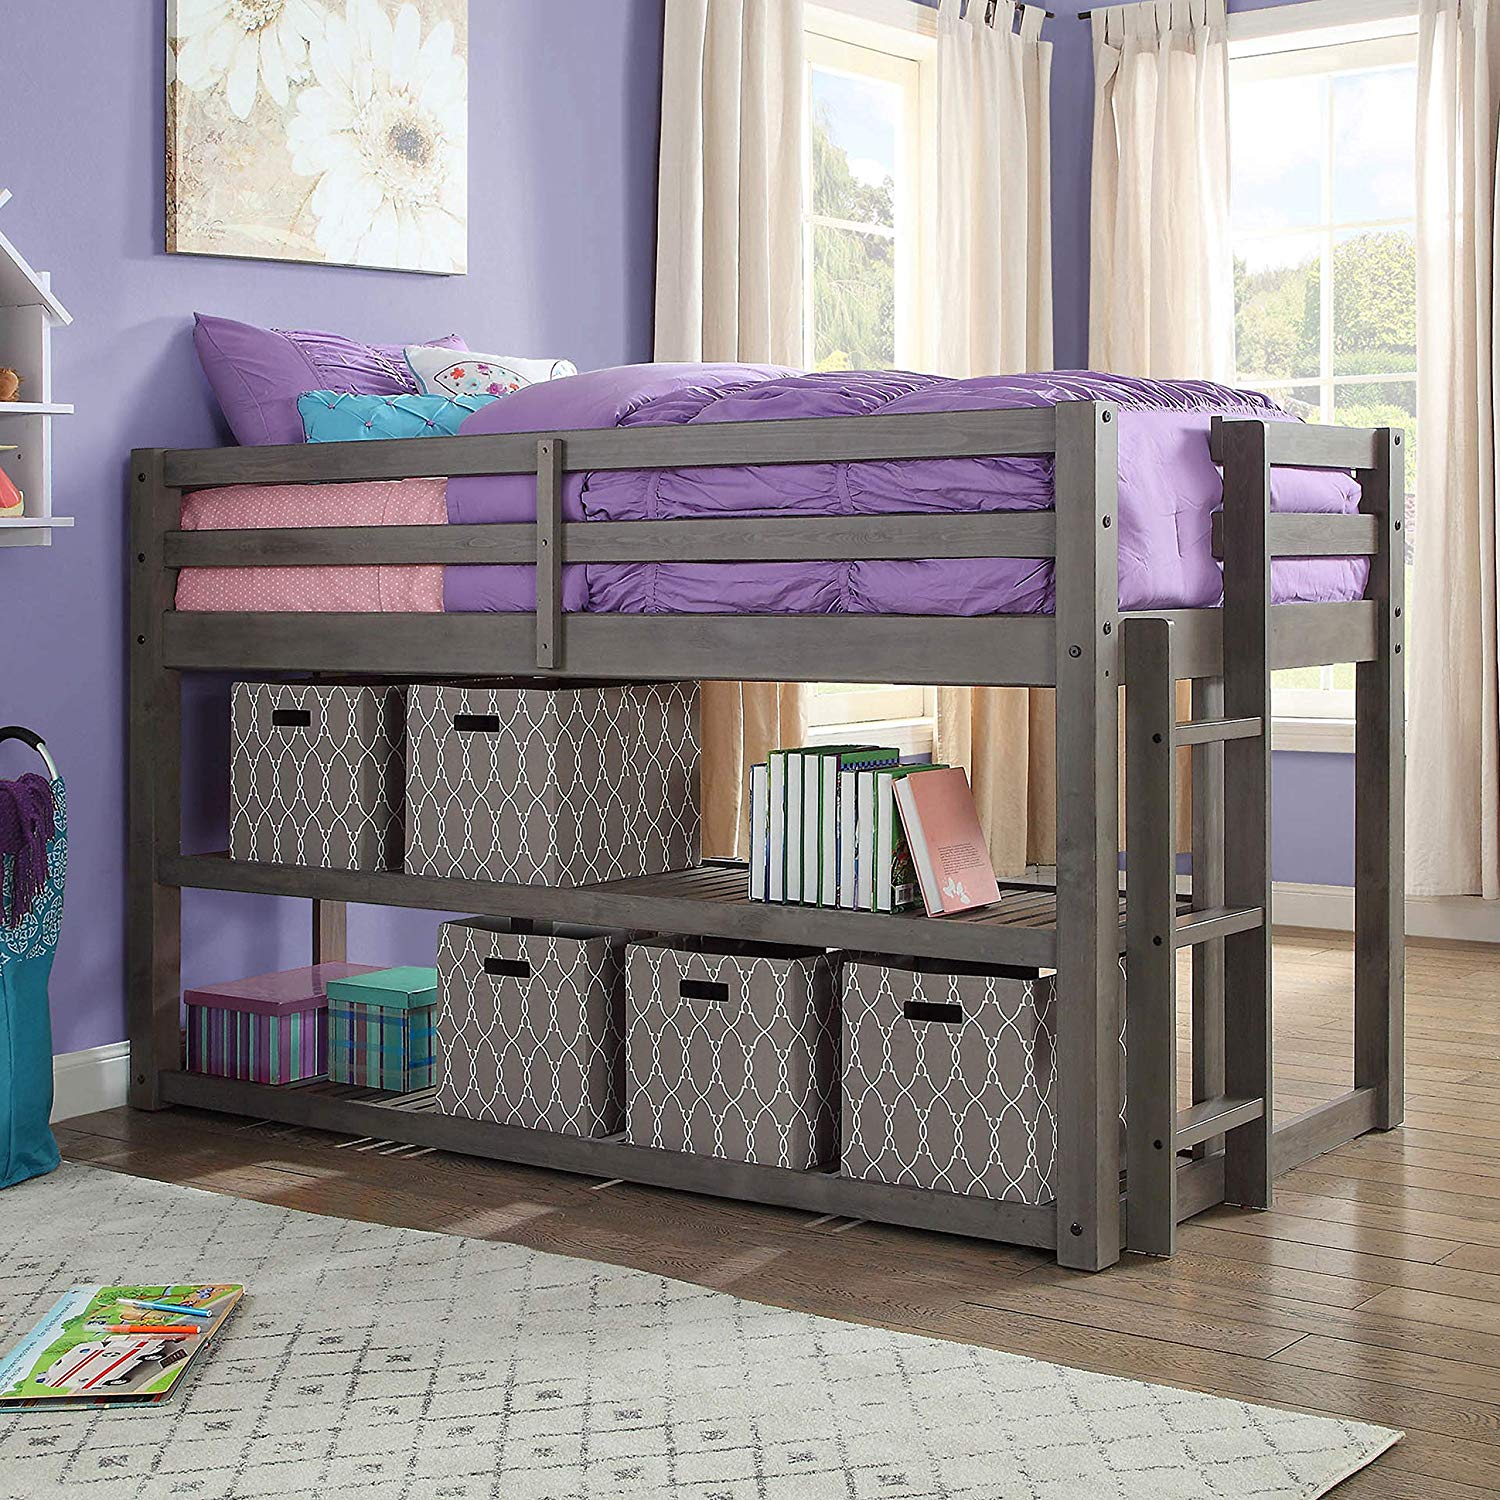 Better Homes and Gardens Loft Storage Bed with Spacious Storage Shelves